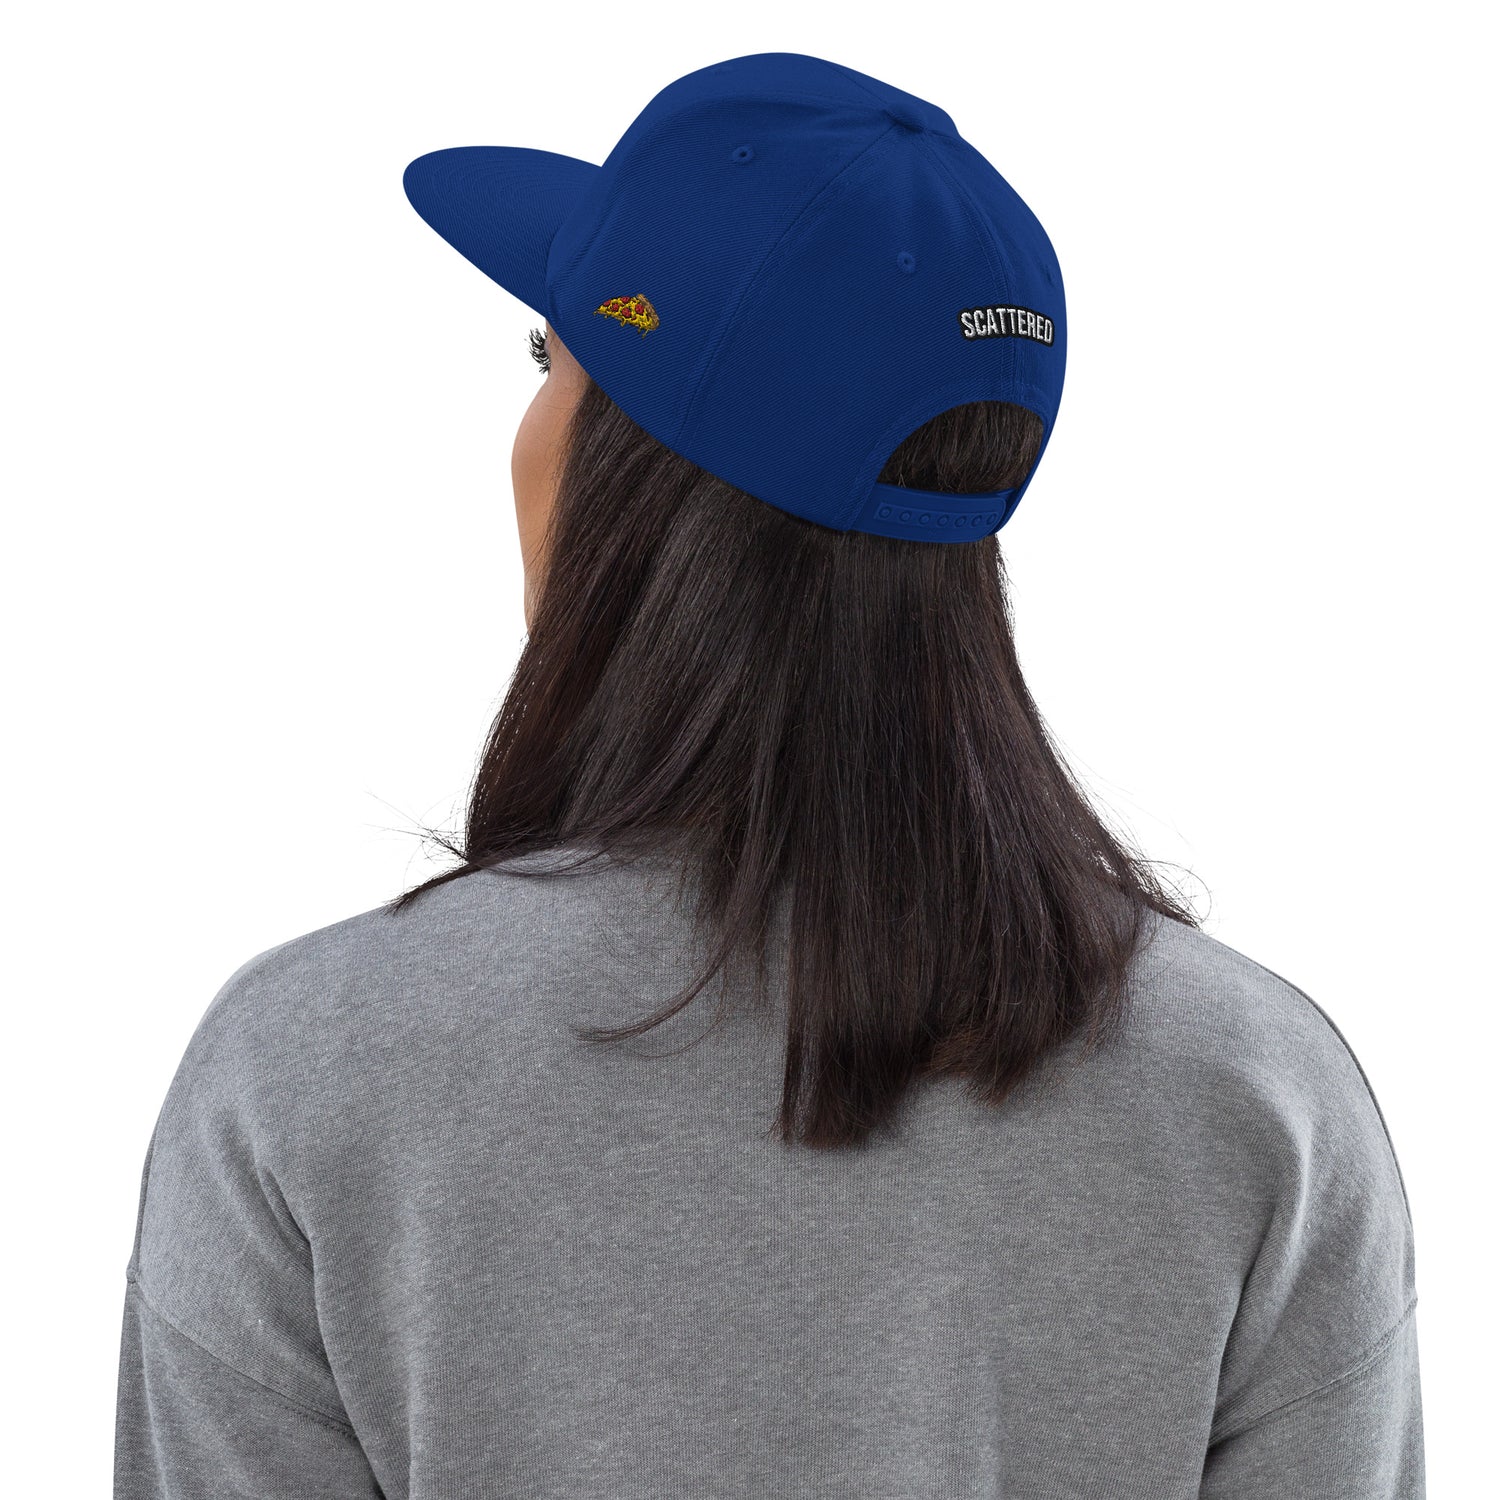 New York Apple Logo Embroidered Royal Blue Snapback Hat (Pizza) Scattered Streetwear